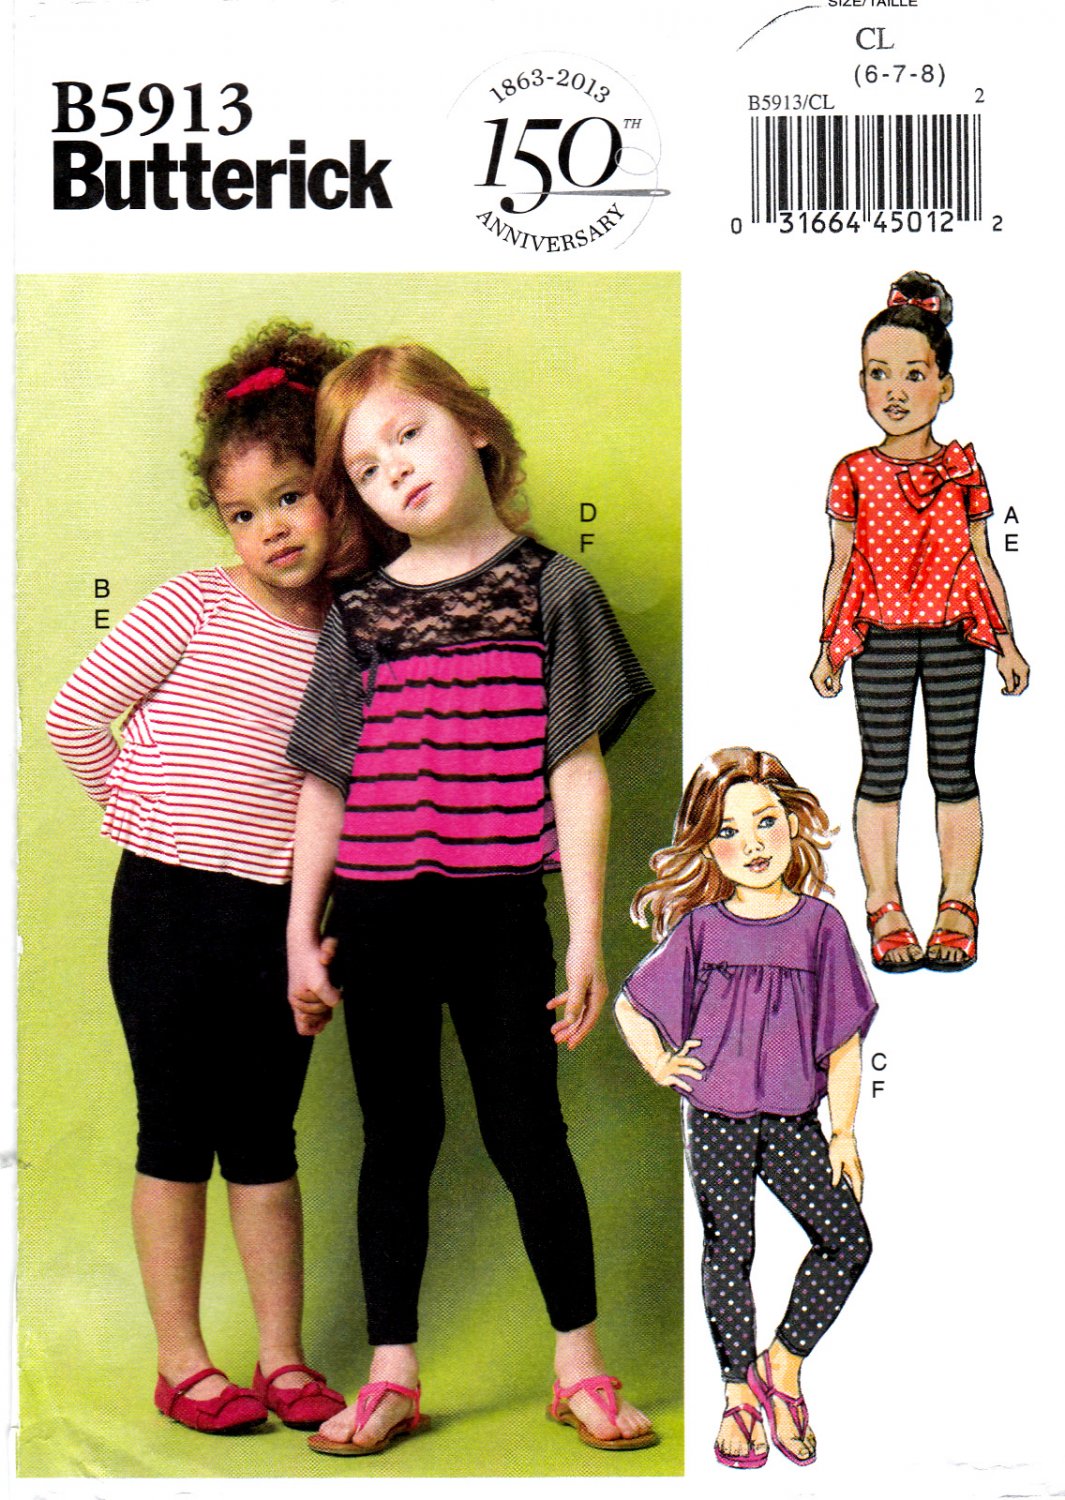 Butterick B5913 5913 Girls Pullover Tops Sewing Pattern Leggings Sizes 6-7-8 Varying Sleeves